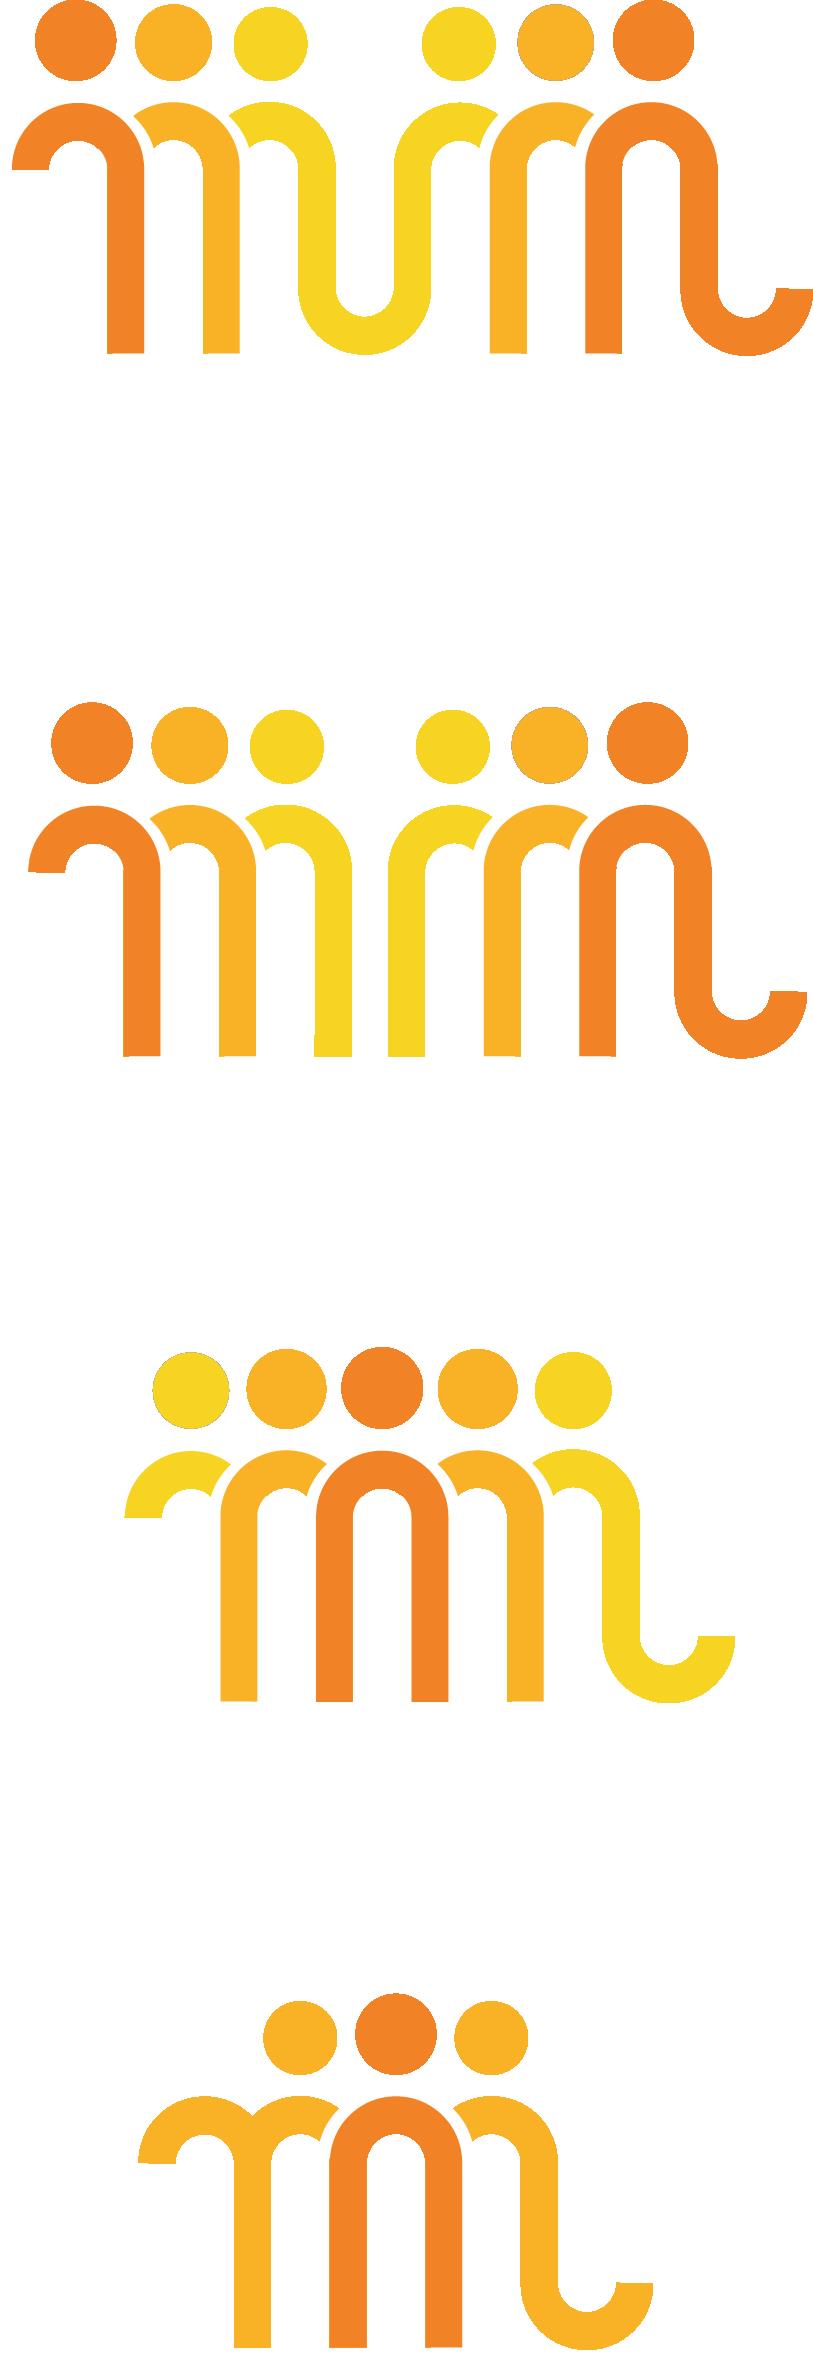 previous iterations of the Mechelen Matcht logo